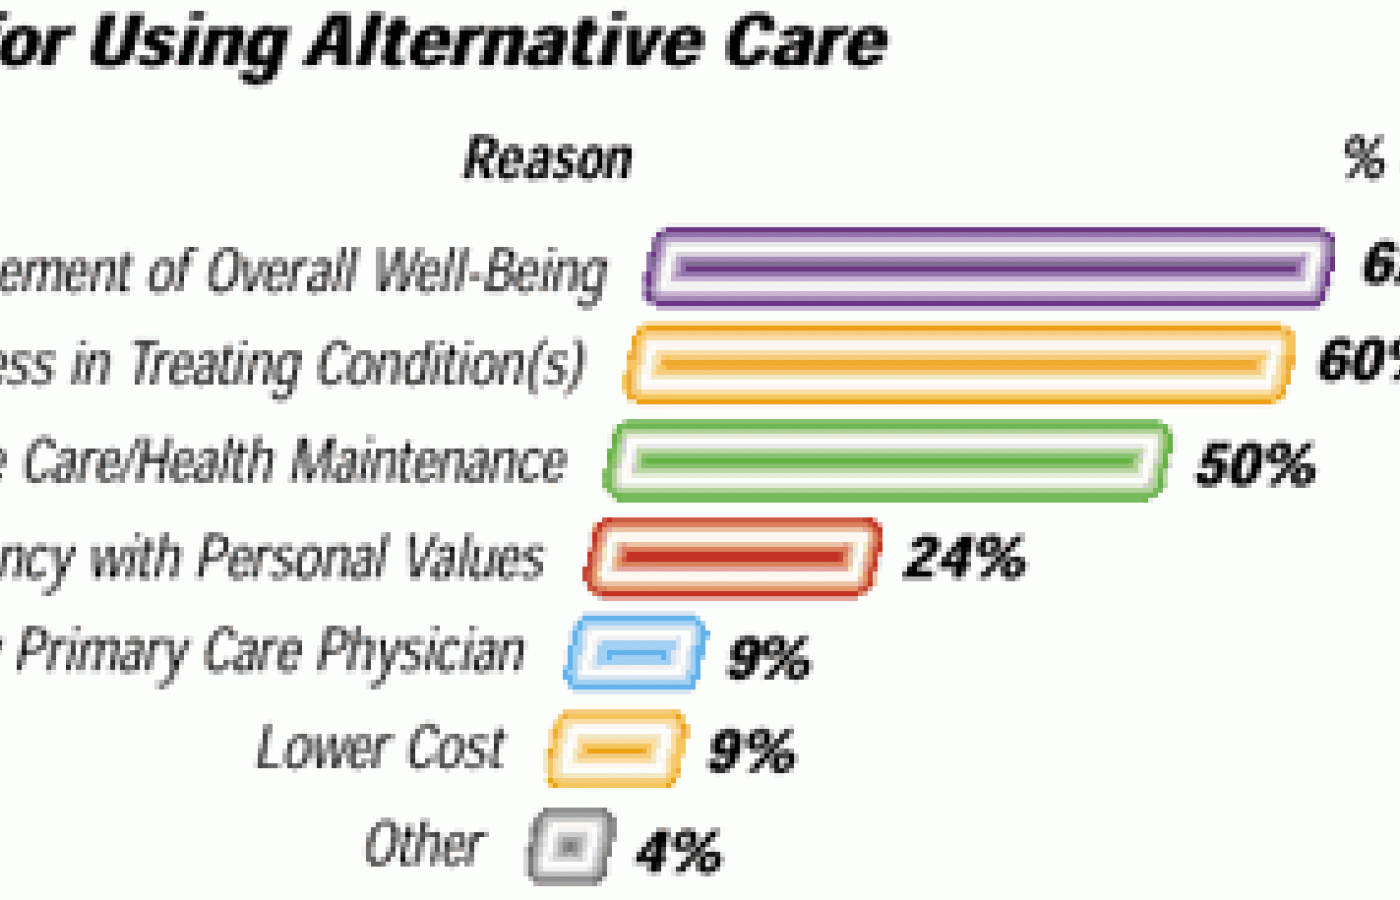 Graph showing reasons for using alternative health care.